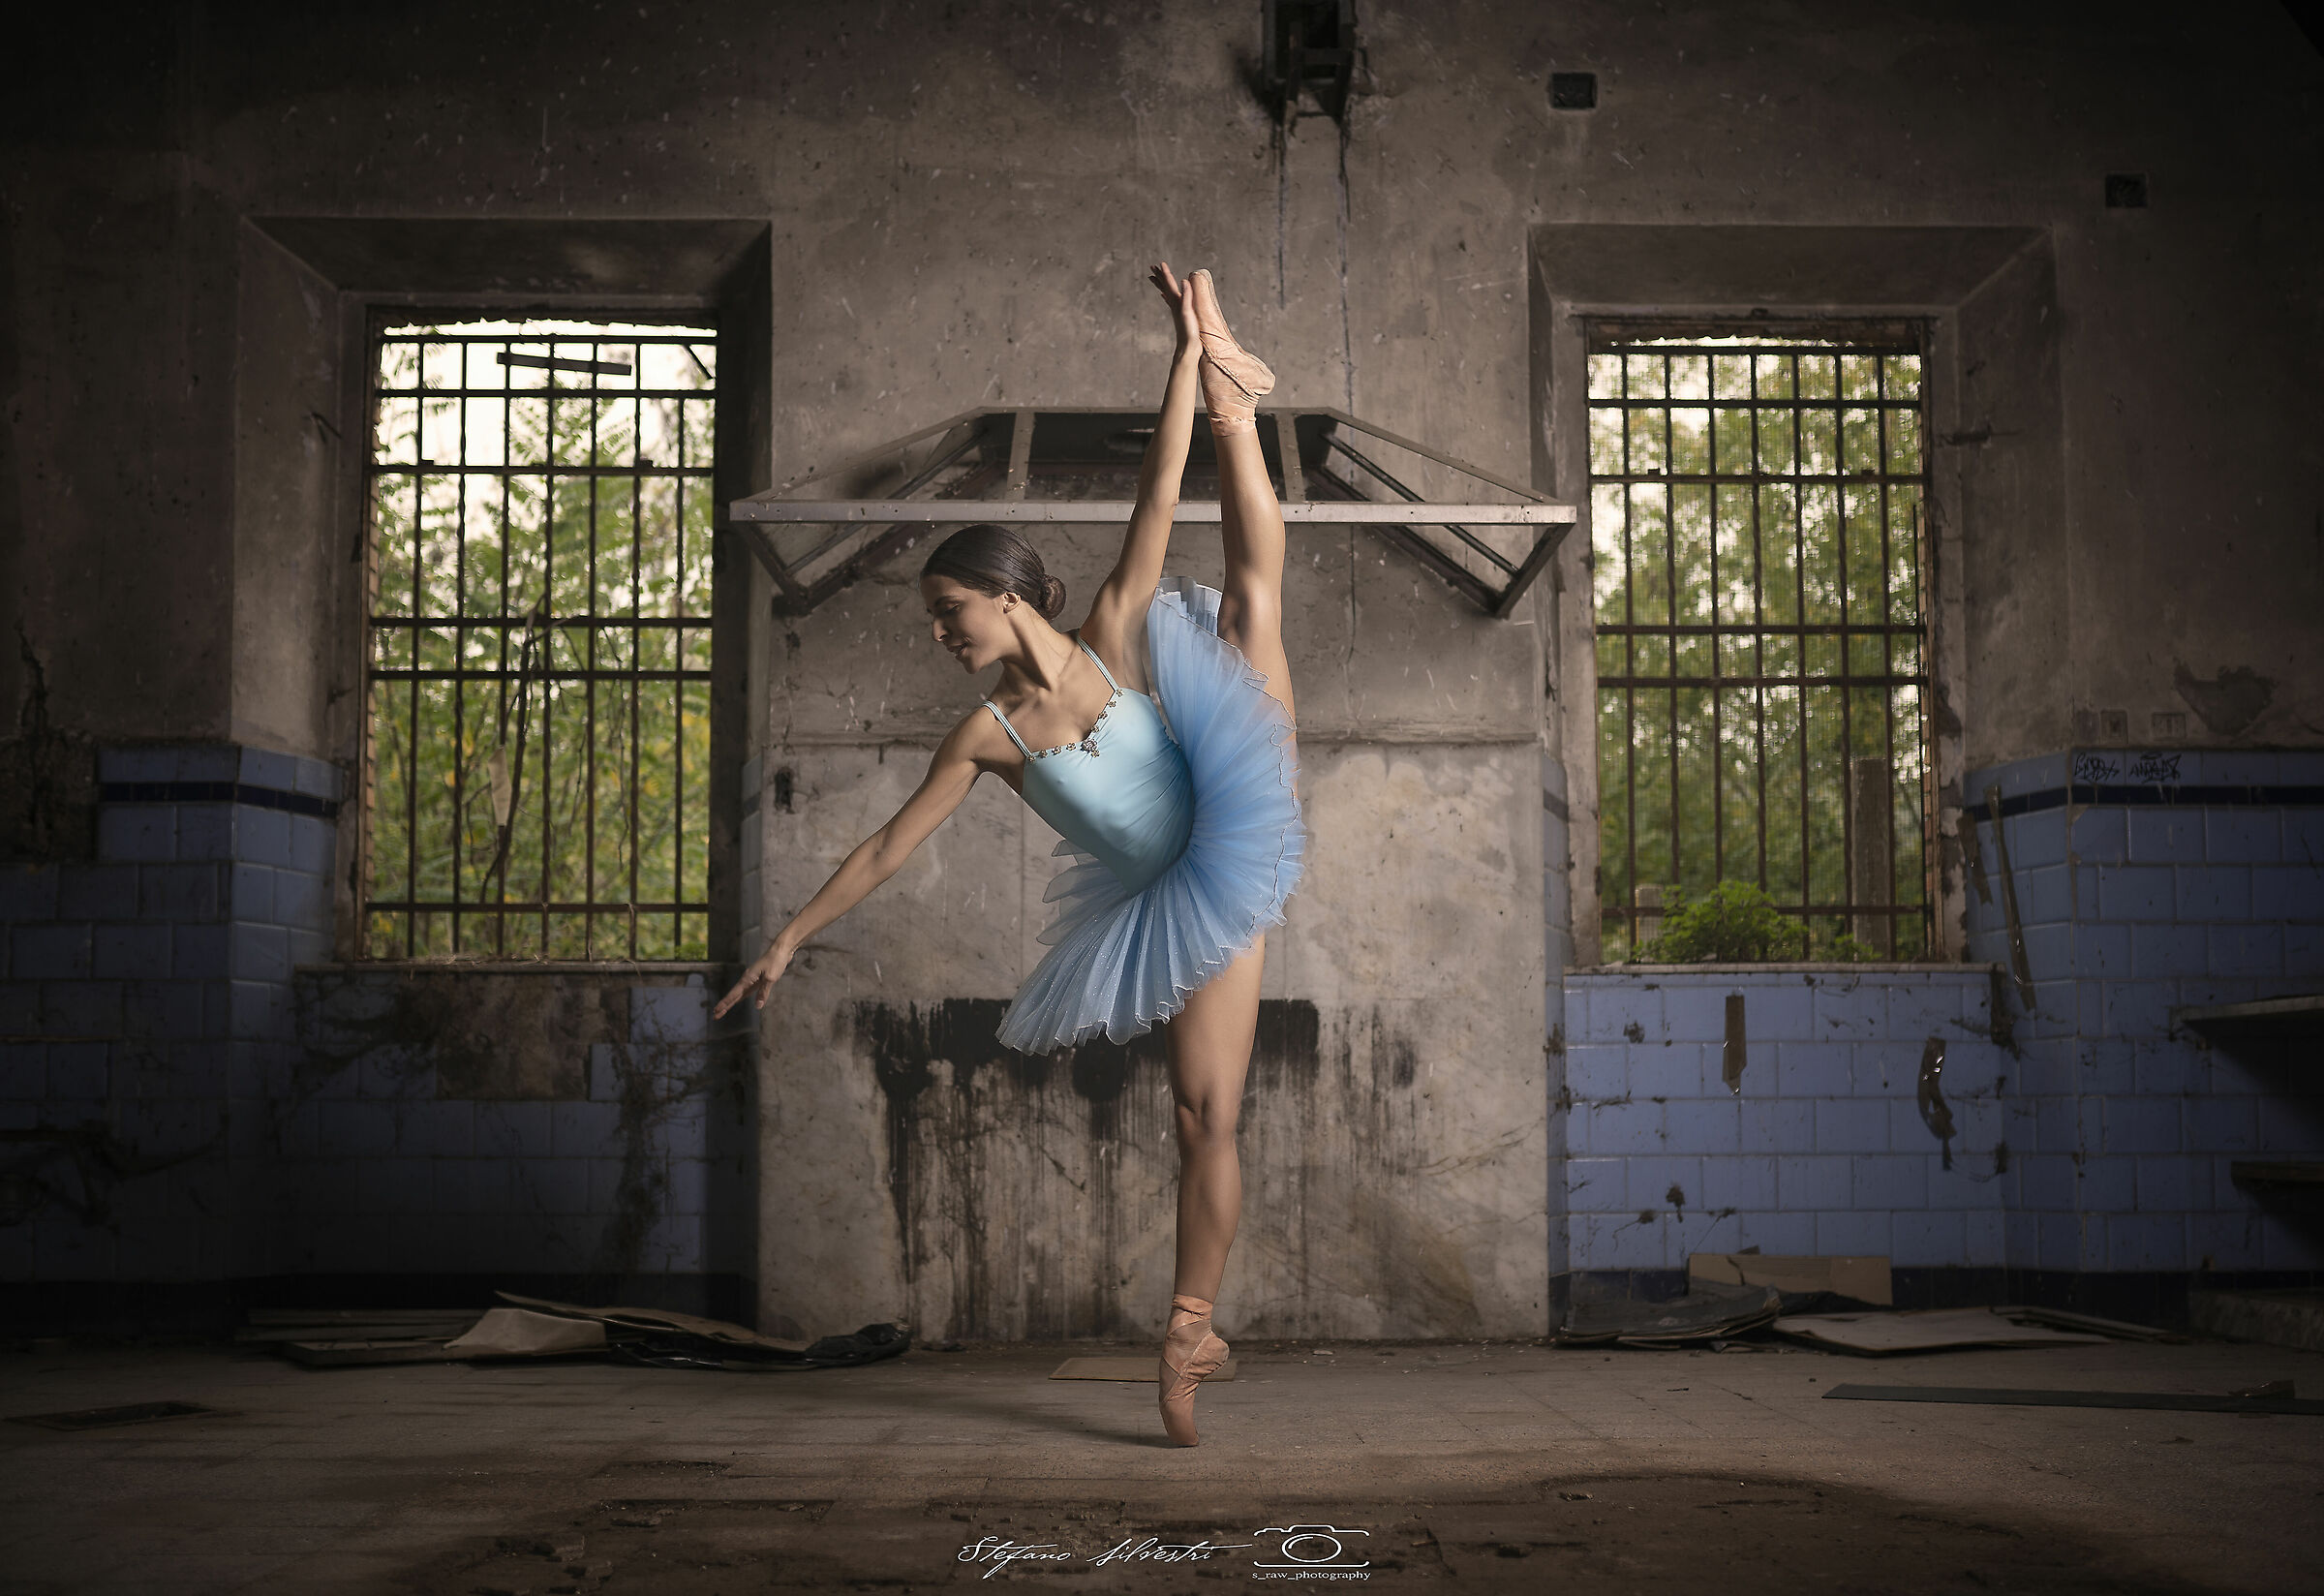 the fusion of two arts, dance and photography...